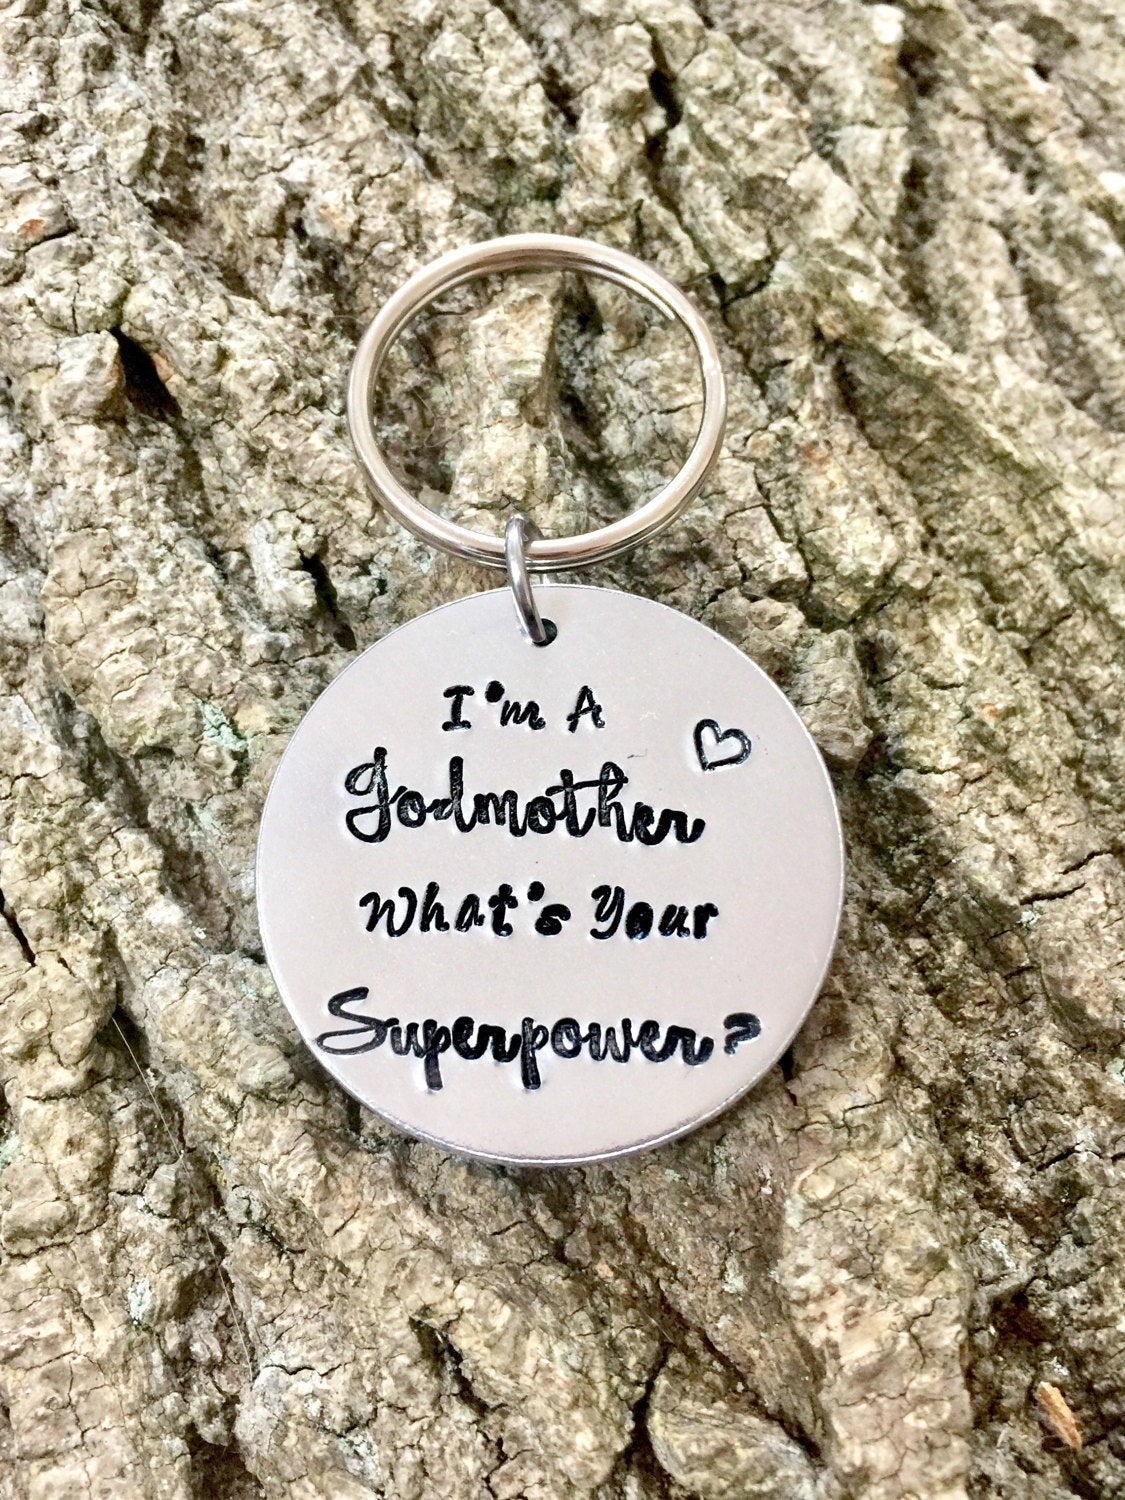 I'm A Godmother Whats Your Superpower?, Godmother Gift, Christening Gift, Godparent Gift, God Mother Gift, Godparent, Gift For God